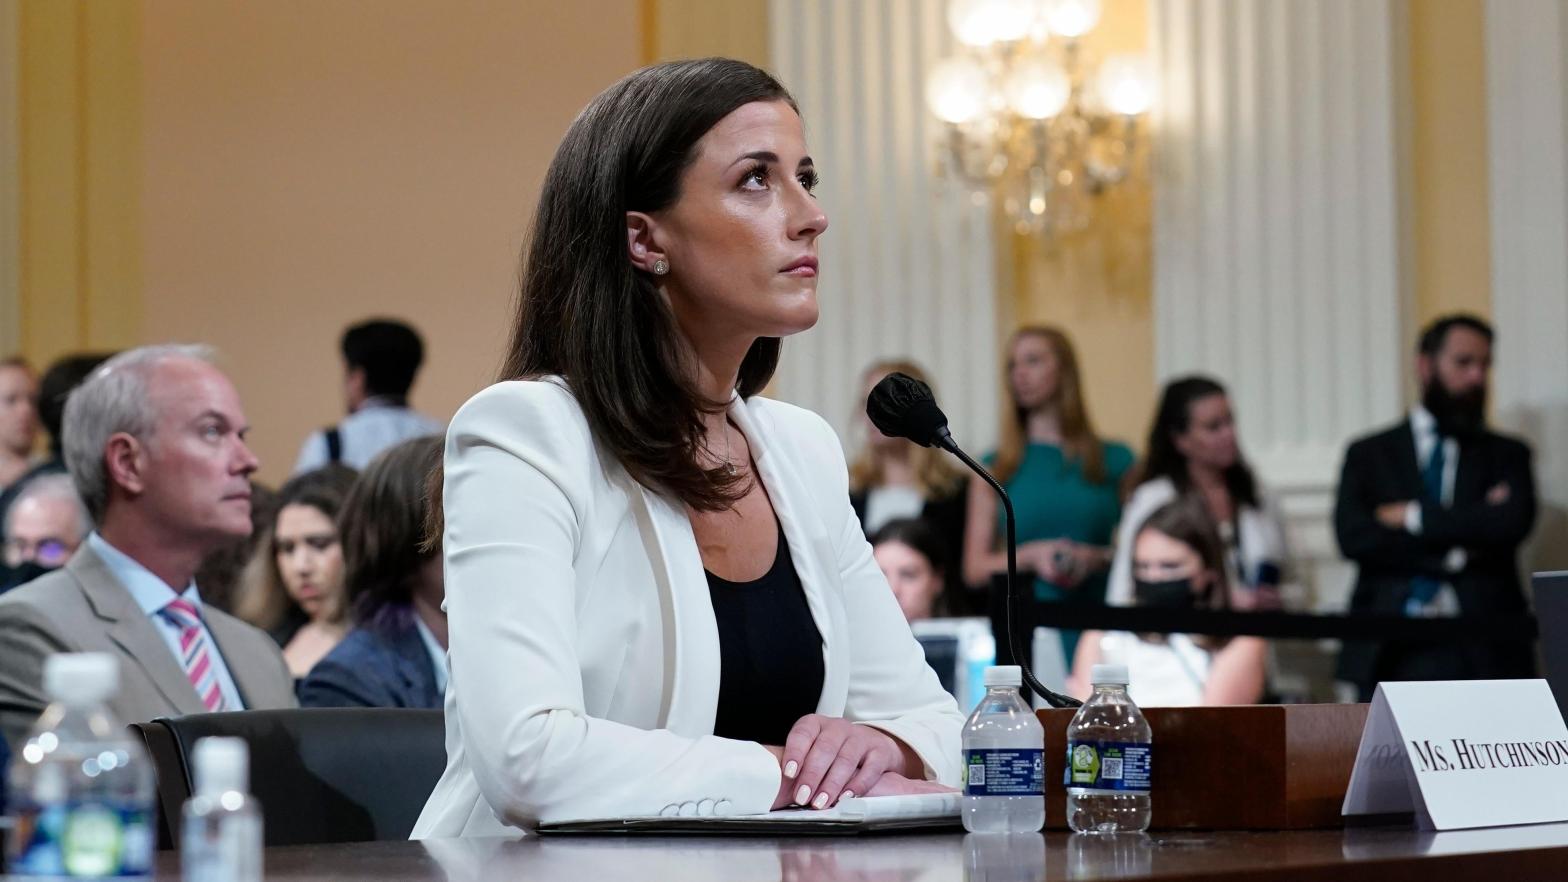 Cassidy Hutchinson, former aide to Trump White House chief of staff Mark Meadows, listens as the House select committee investigating the Jan. 6 attack on the U.S. Capitol holds a hearing at the Capitol in Washington, Tuesday, June 28, 2022. (Photo: J. Scott Applewhite, AP)